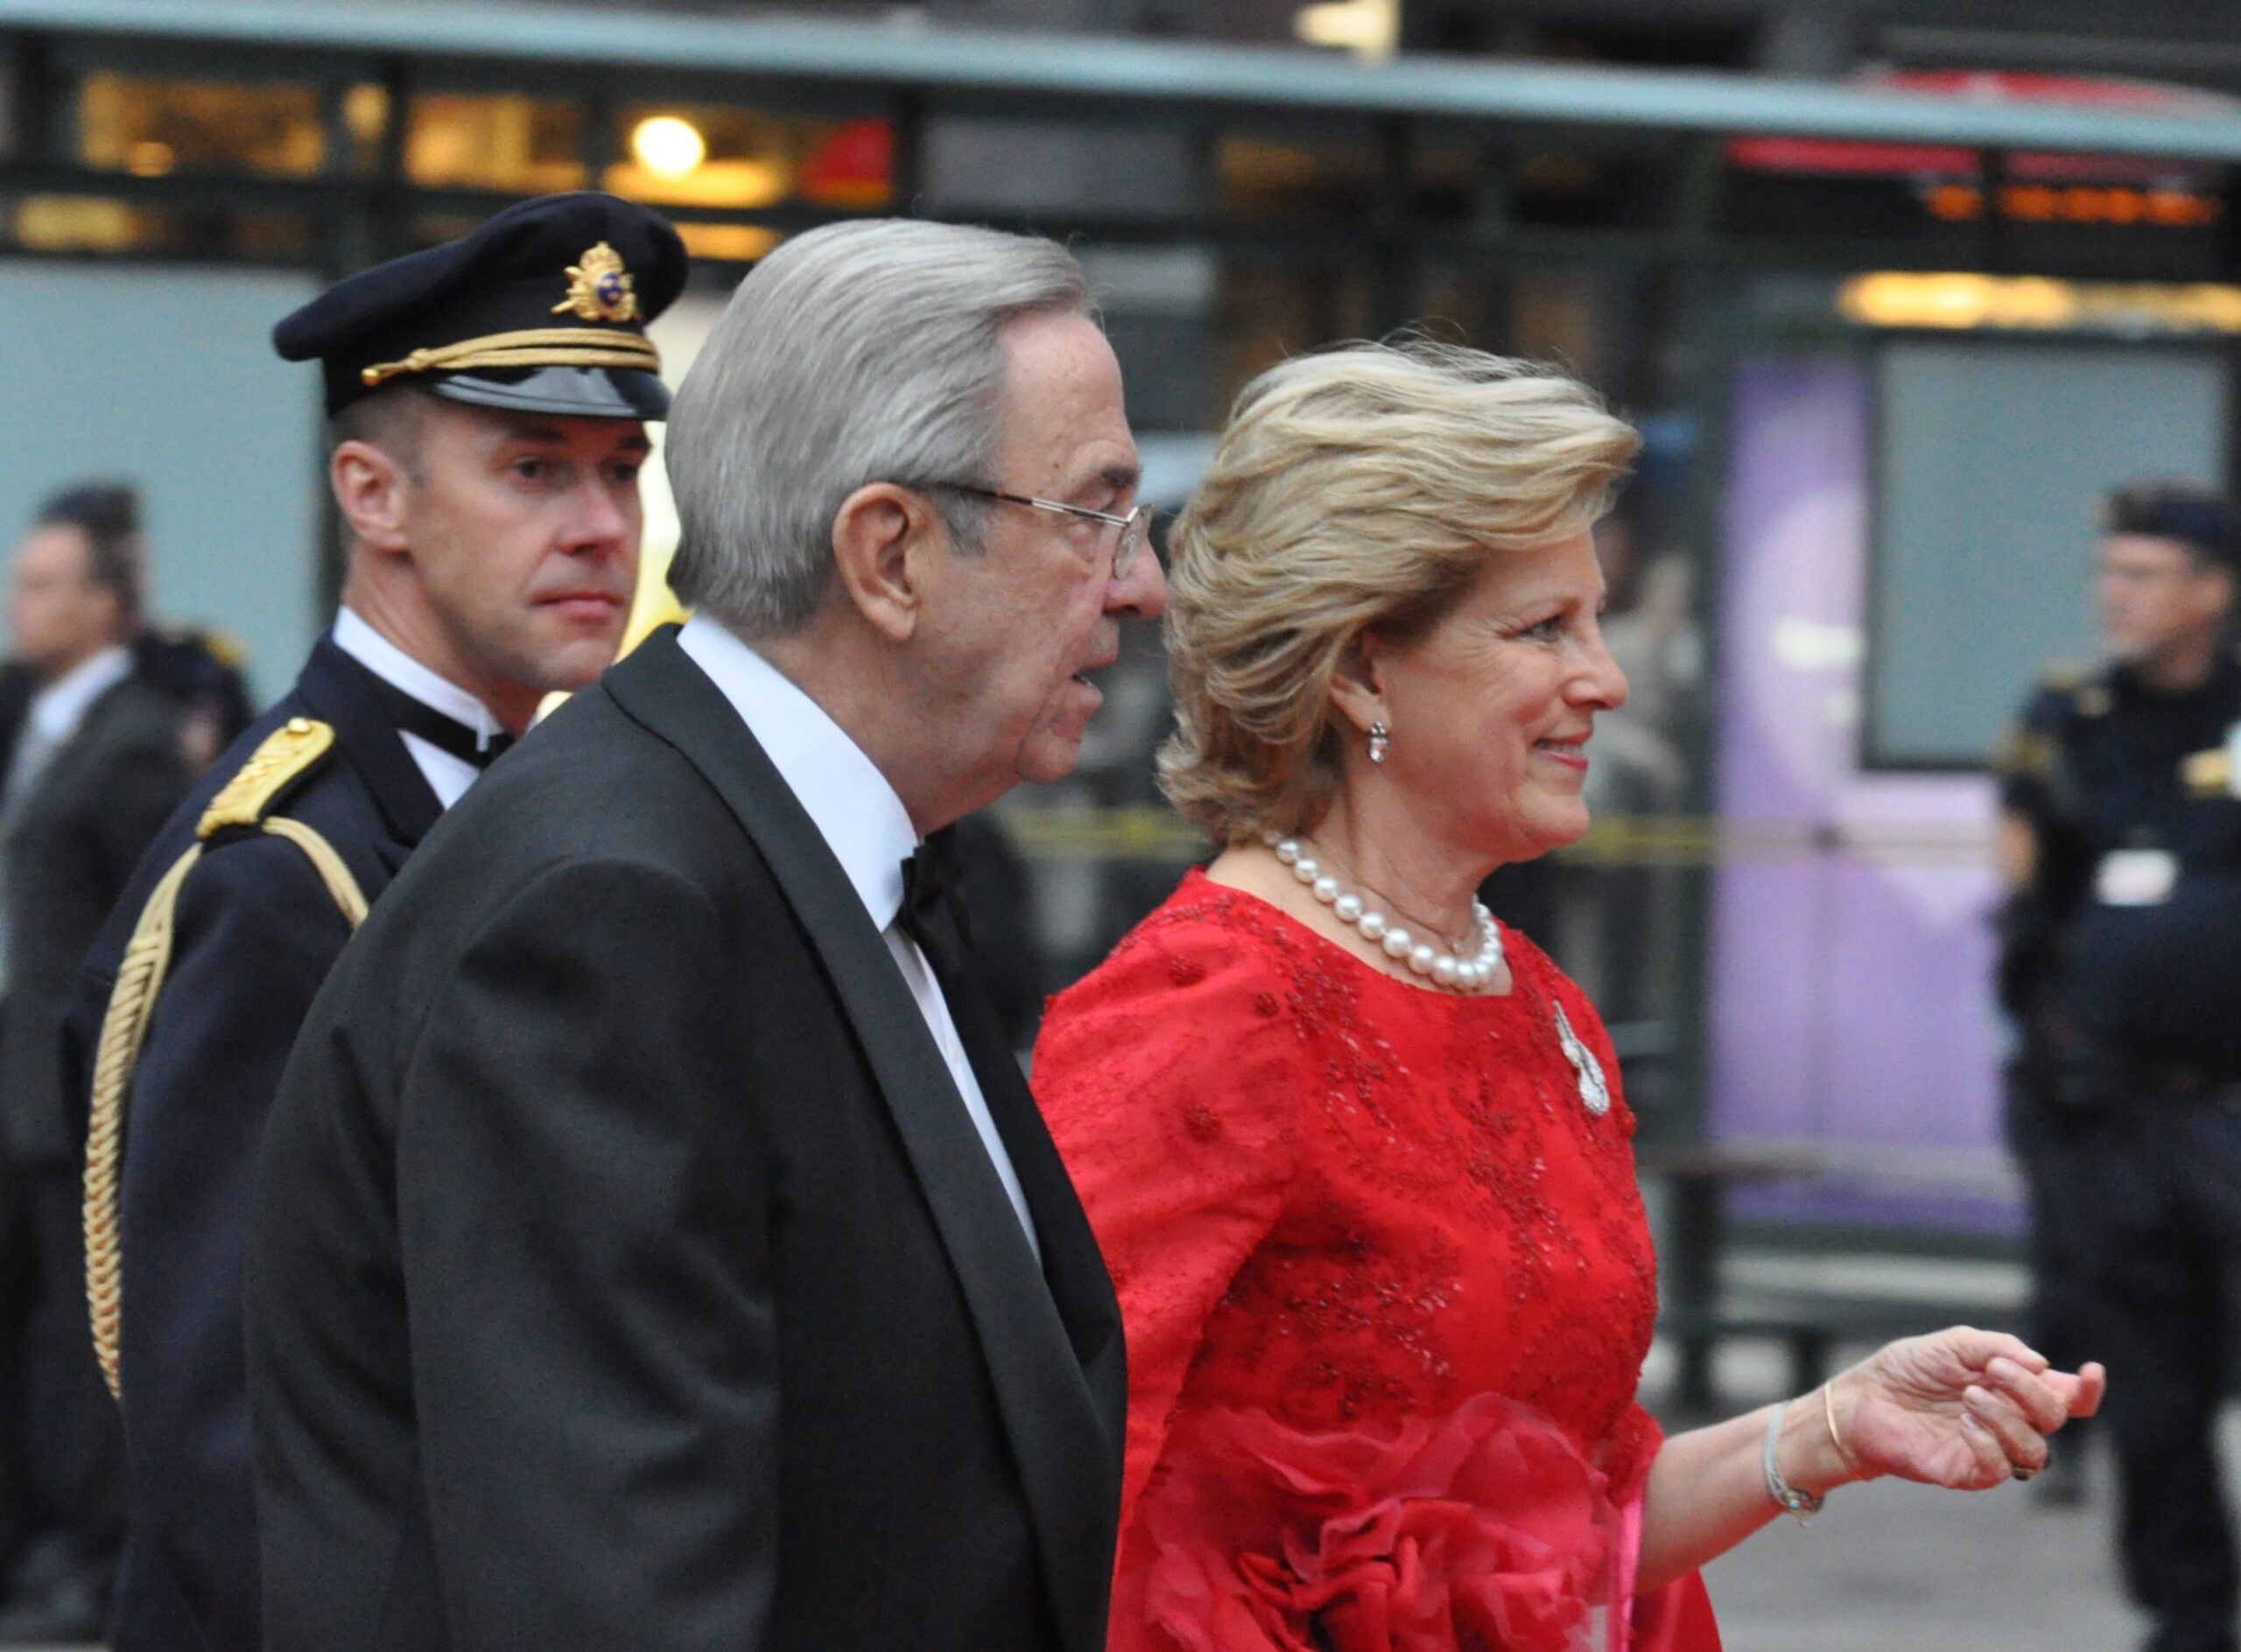 A Danish queen’s work is neve done: Four HRH titles down, hundreds more to go